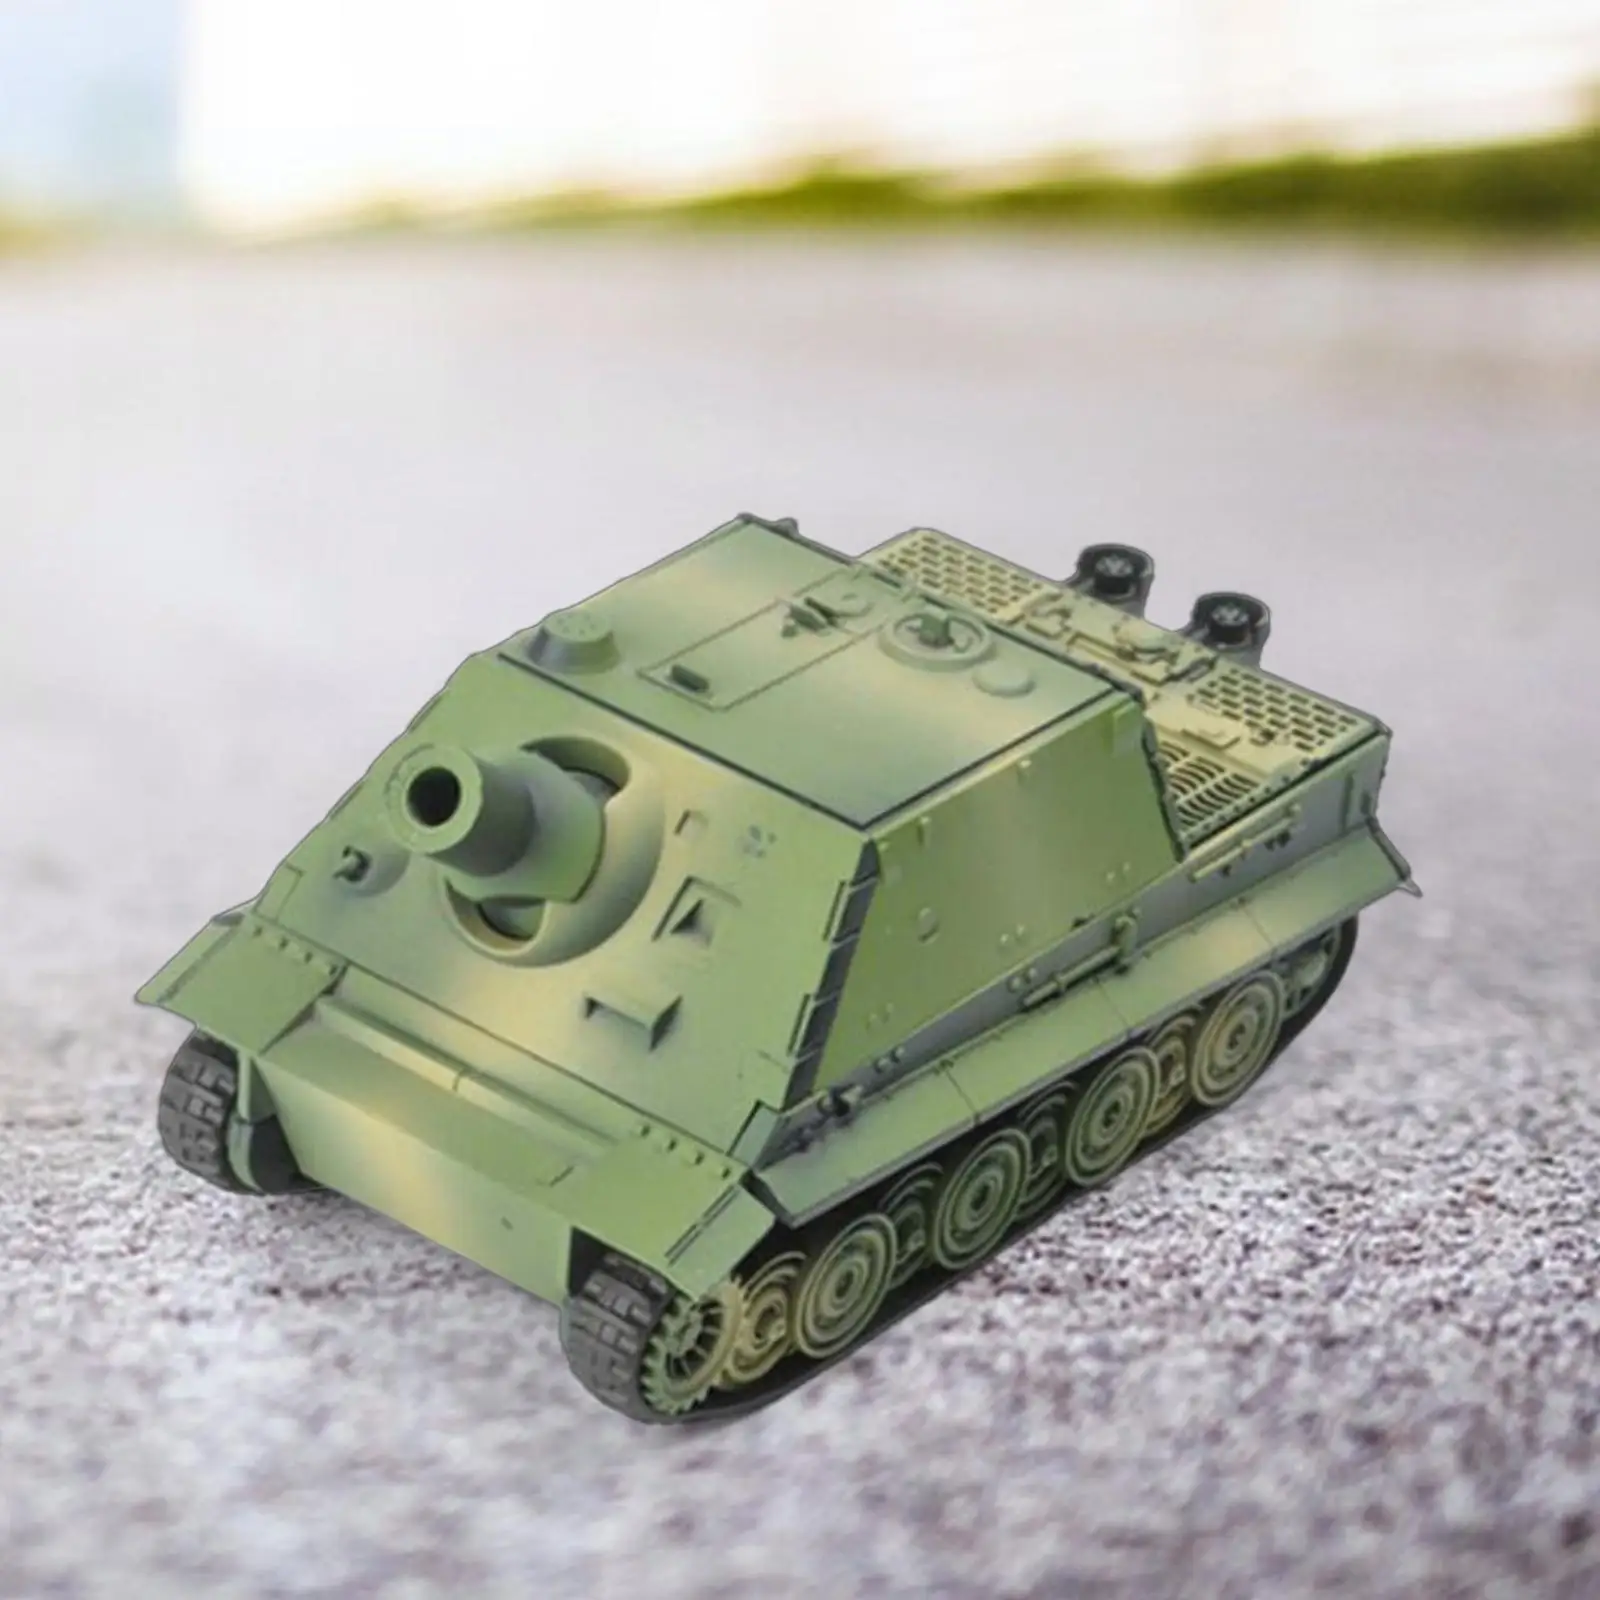 1/72 4D Assemble Tank Vehicle Model Toy Crafts Micro Landscape Toy Tank for Children Boys